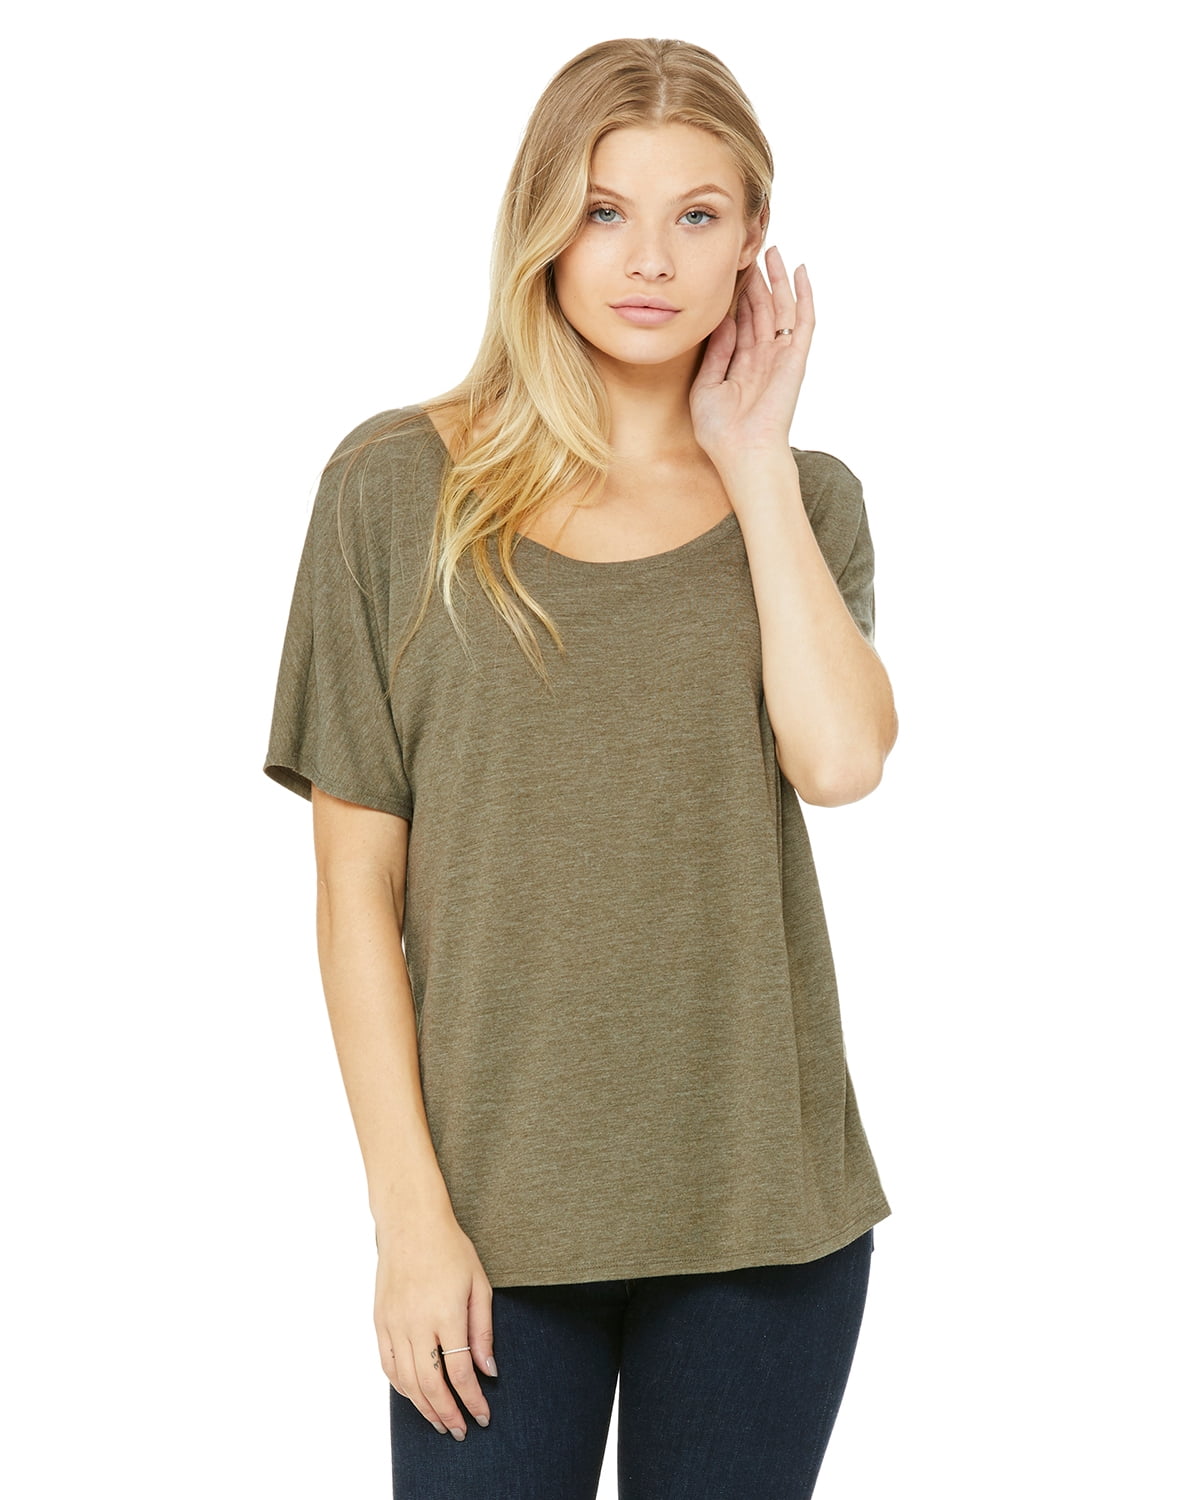 Bella + Canvas, The Ladies' Slouchy T-Shirt - HEATHER OLIVE - 2XL ...